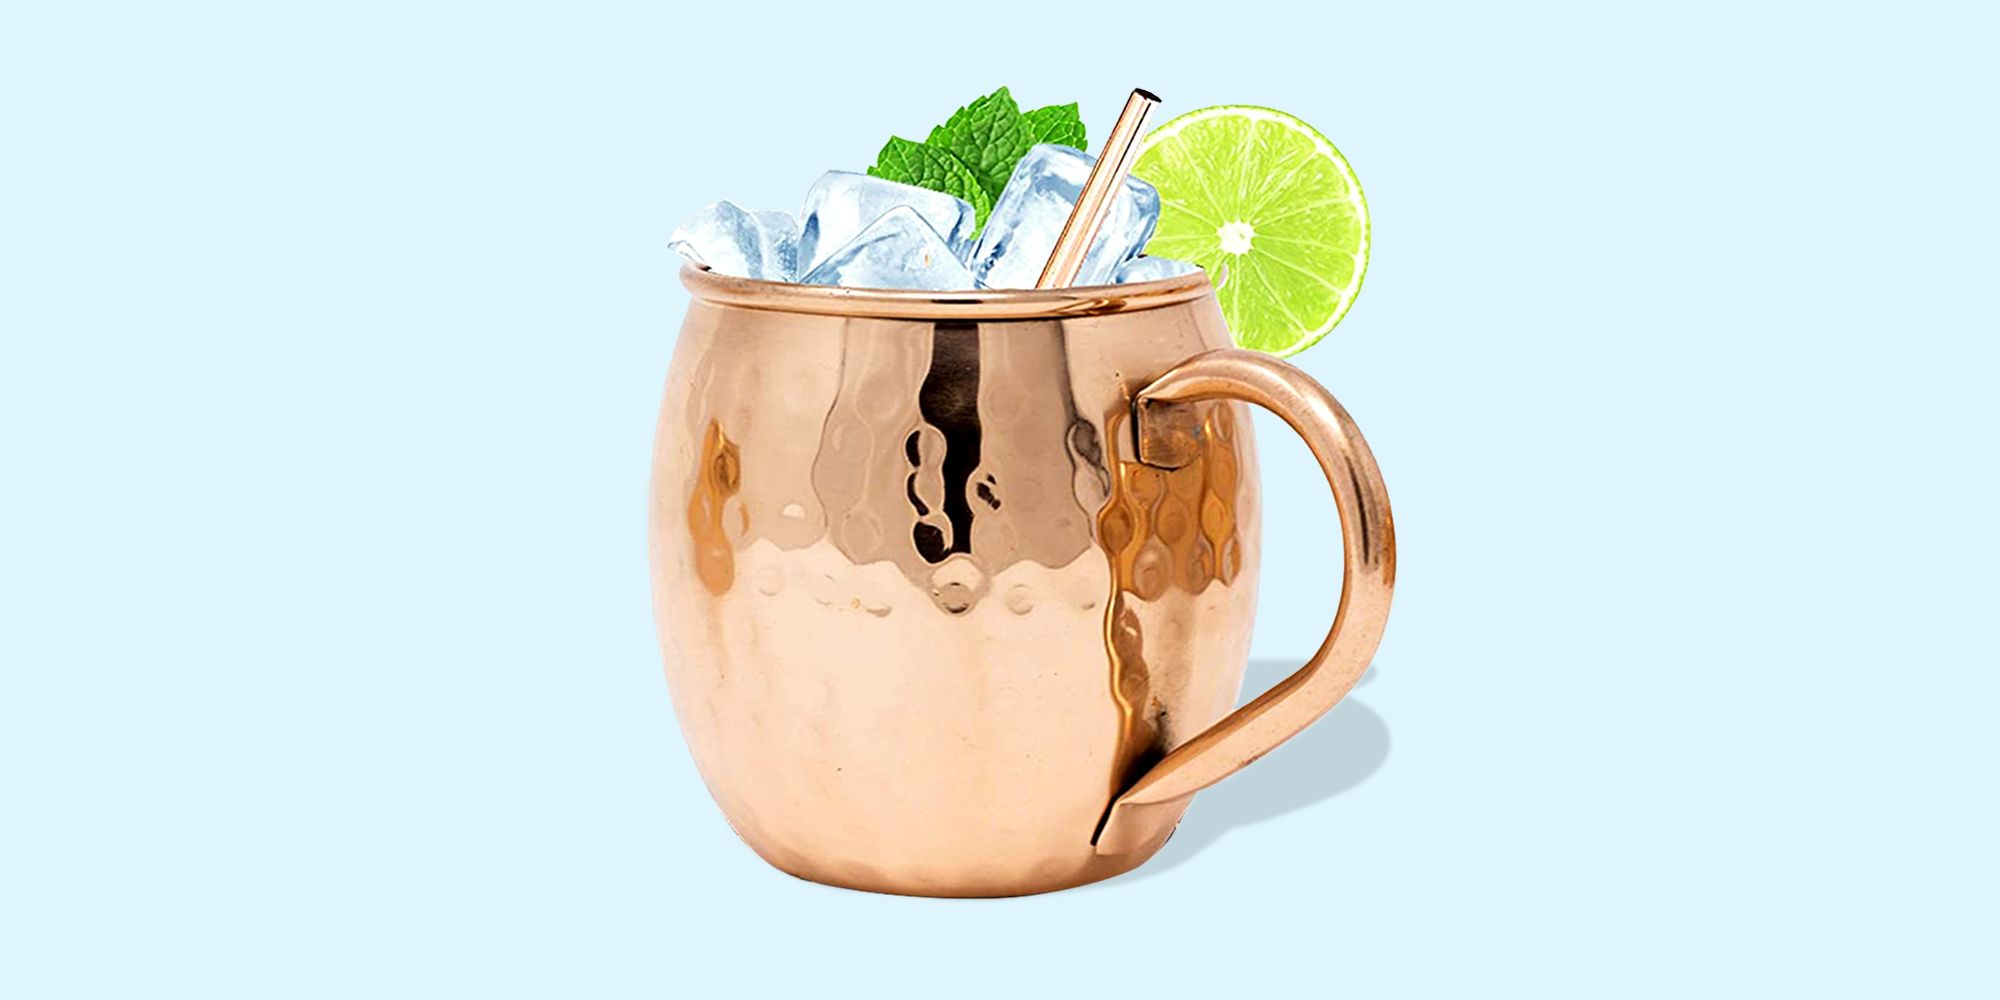 Shop Moscow-Mix's Moscow Mule Copper Mugs on Sale at